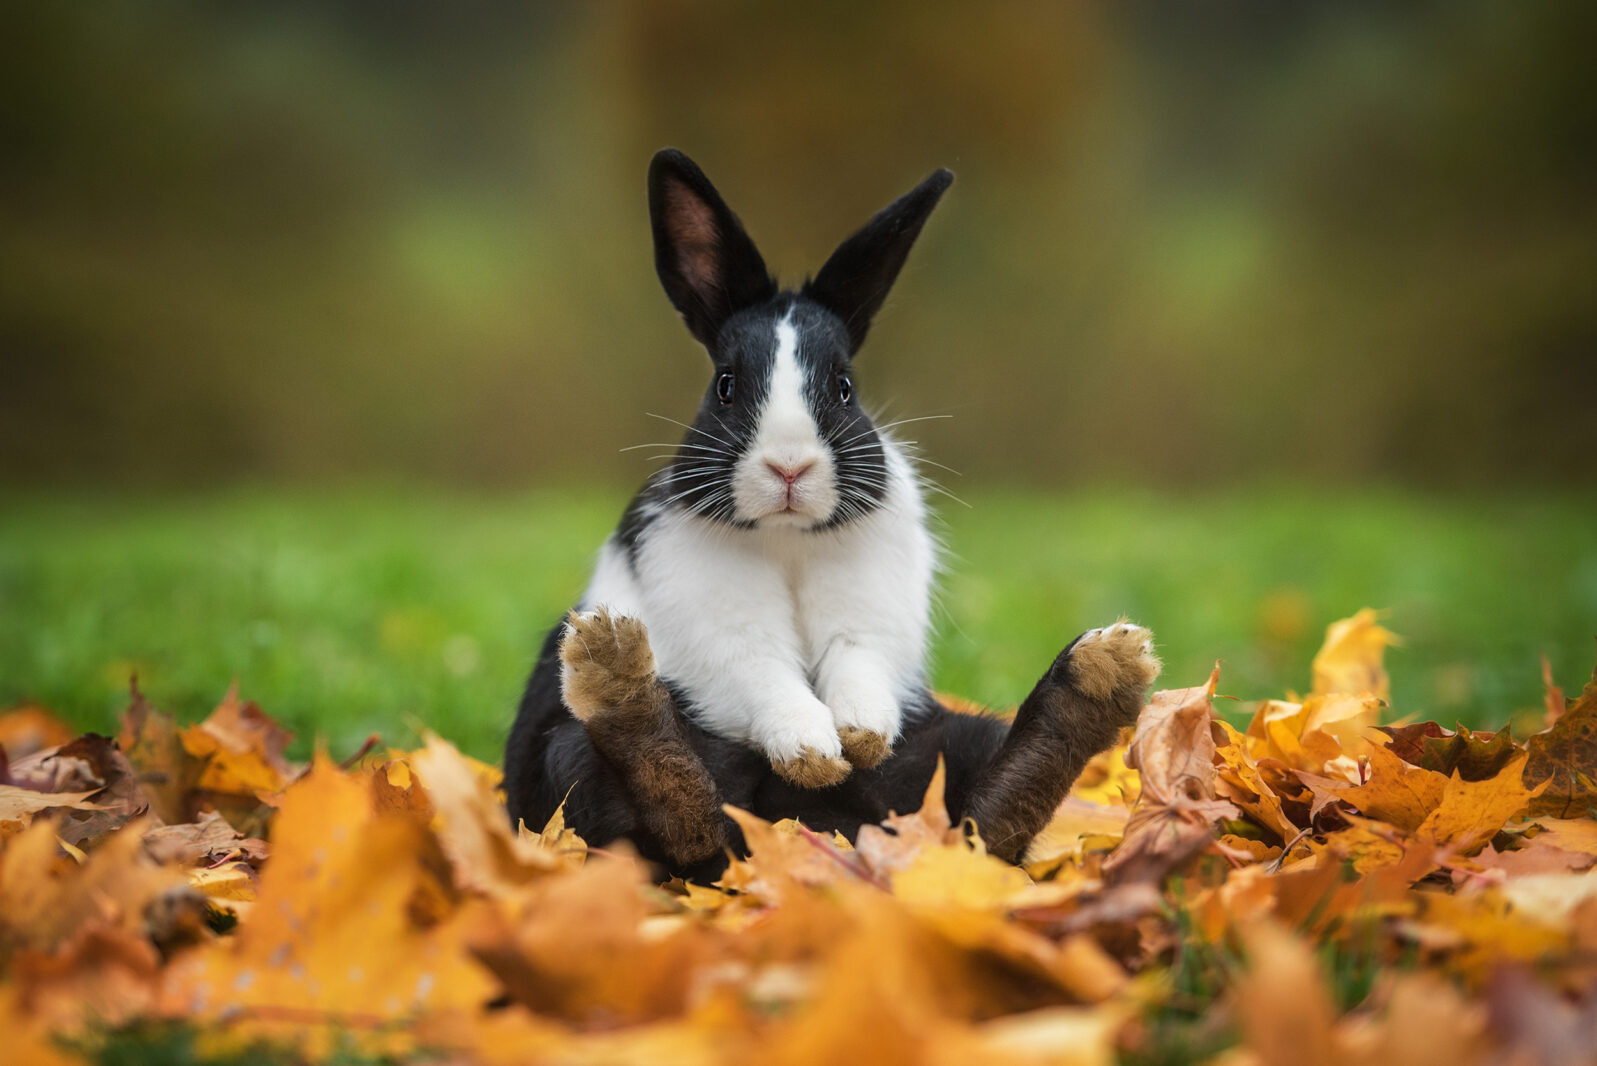 Little funny rabbit sitting in leaves in autumn